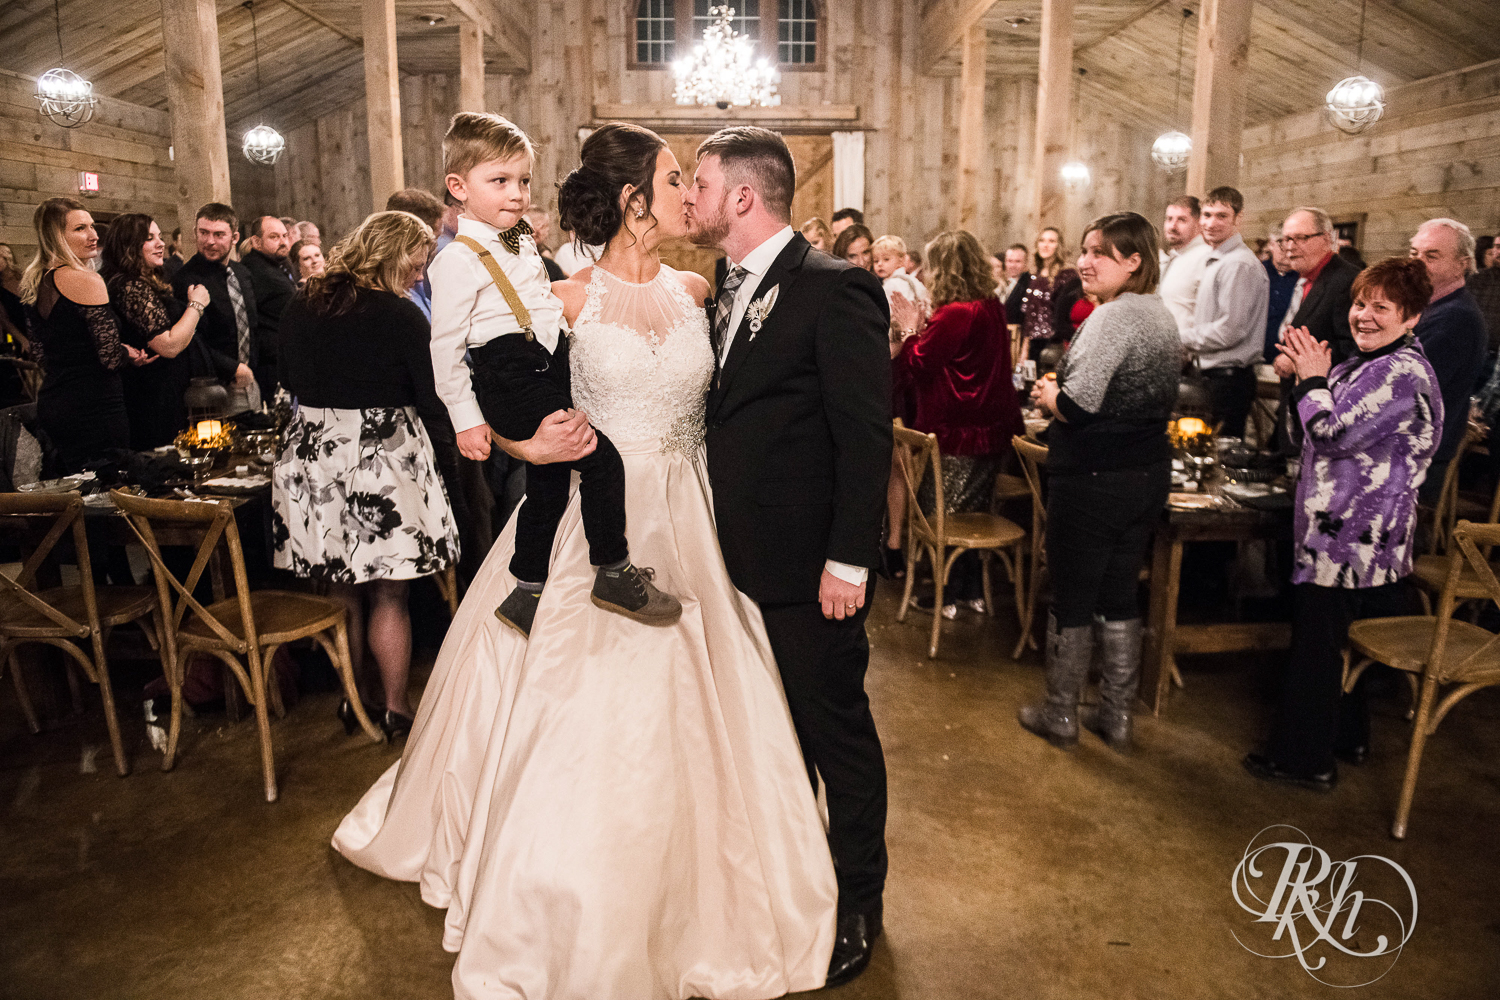 Bride and groom kiss while holding son during new year's eve wedding ceremony at Creekside Farm in Rush City, Minnesota.